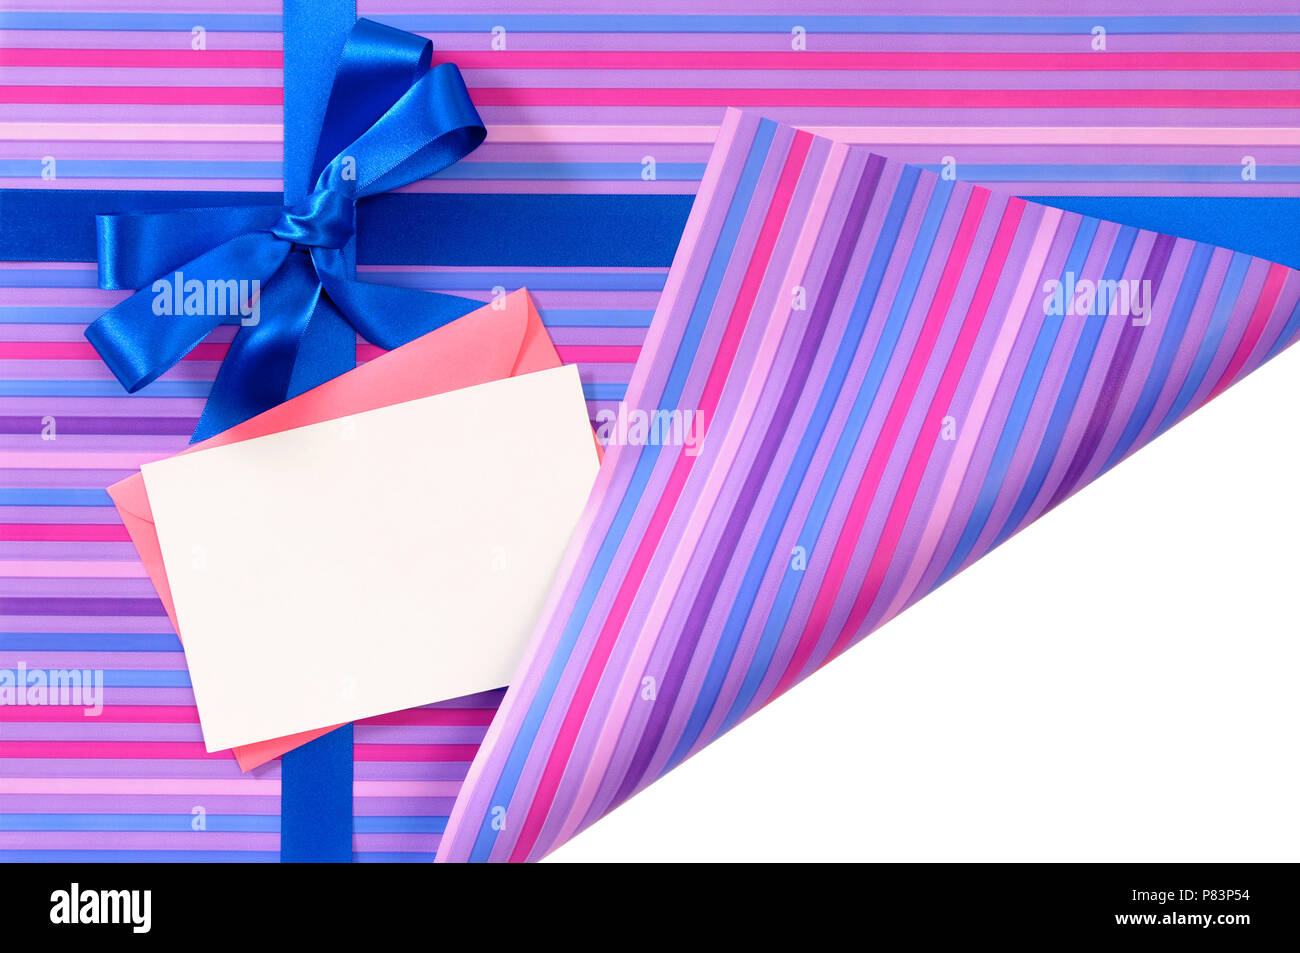 Blue gift ribbon bow on candy stripe wrapping paper, corner folded open revealing white copy space, card and envelope Stock Photo